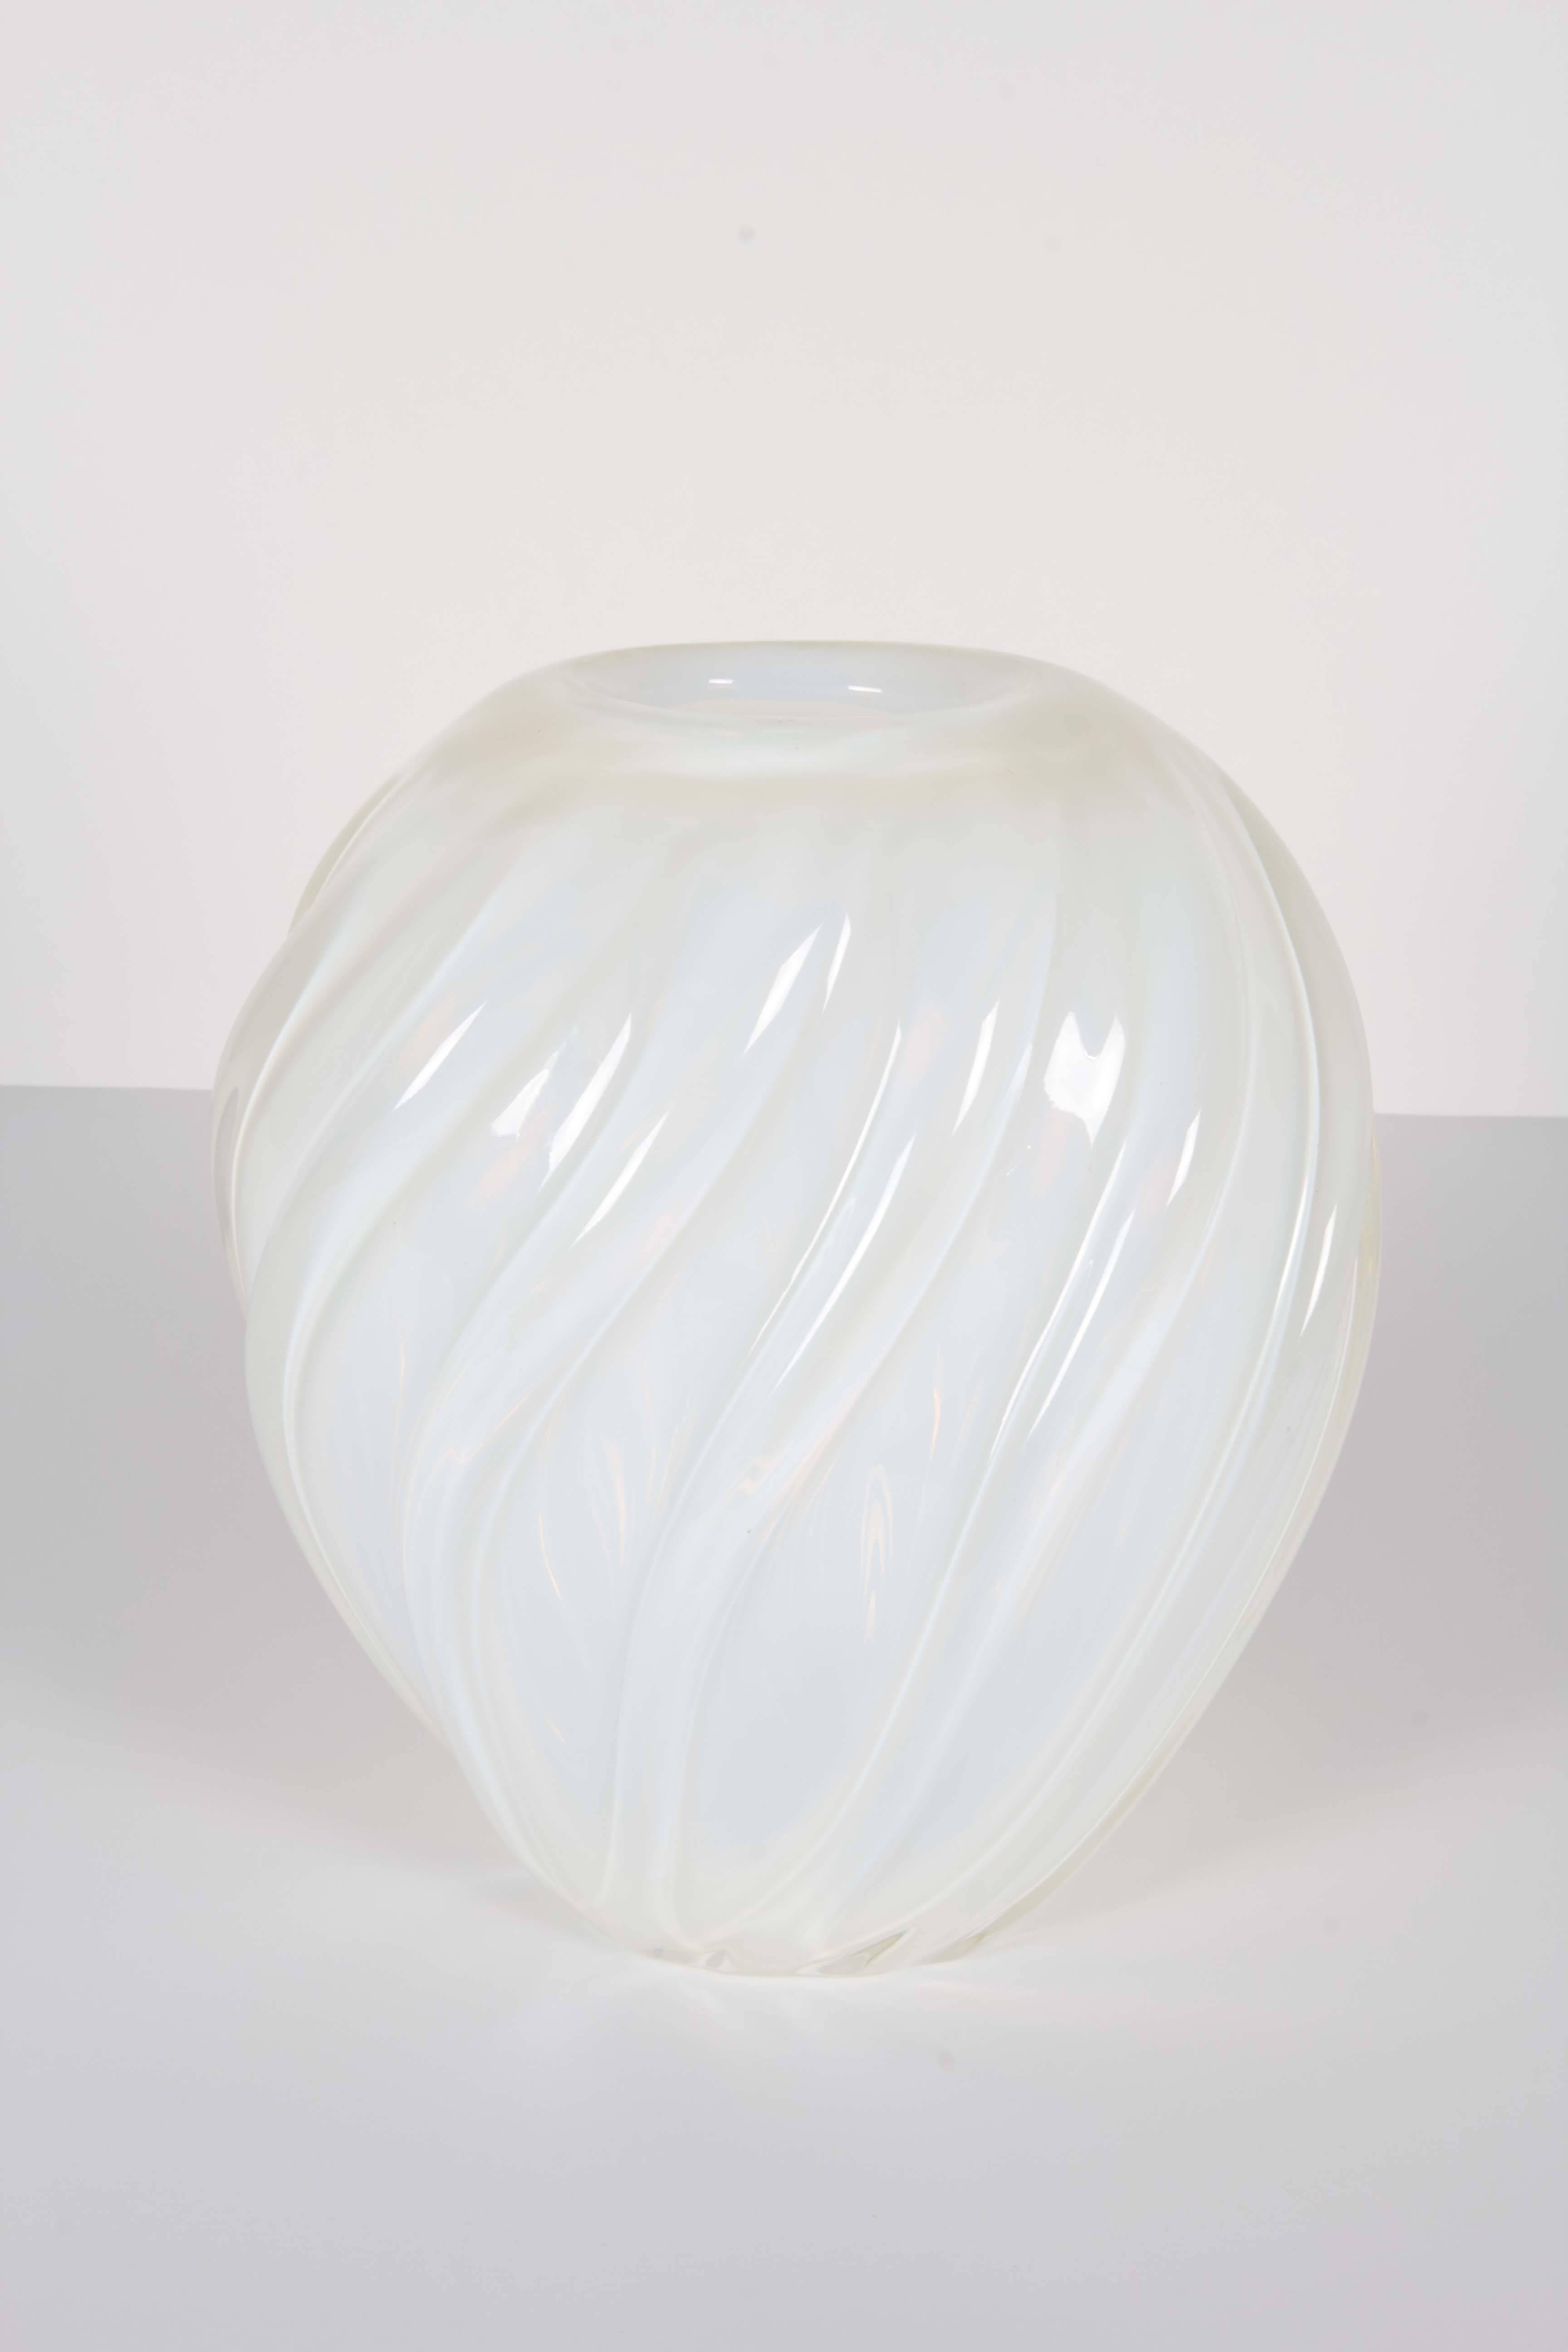 Murano handblown opalescent white glass vase. Has a beautiful ribbed design.

Not available for sale or to ship in the state of California.